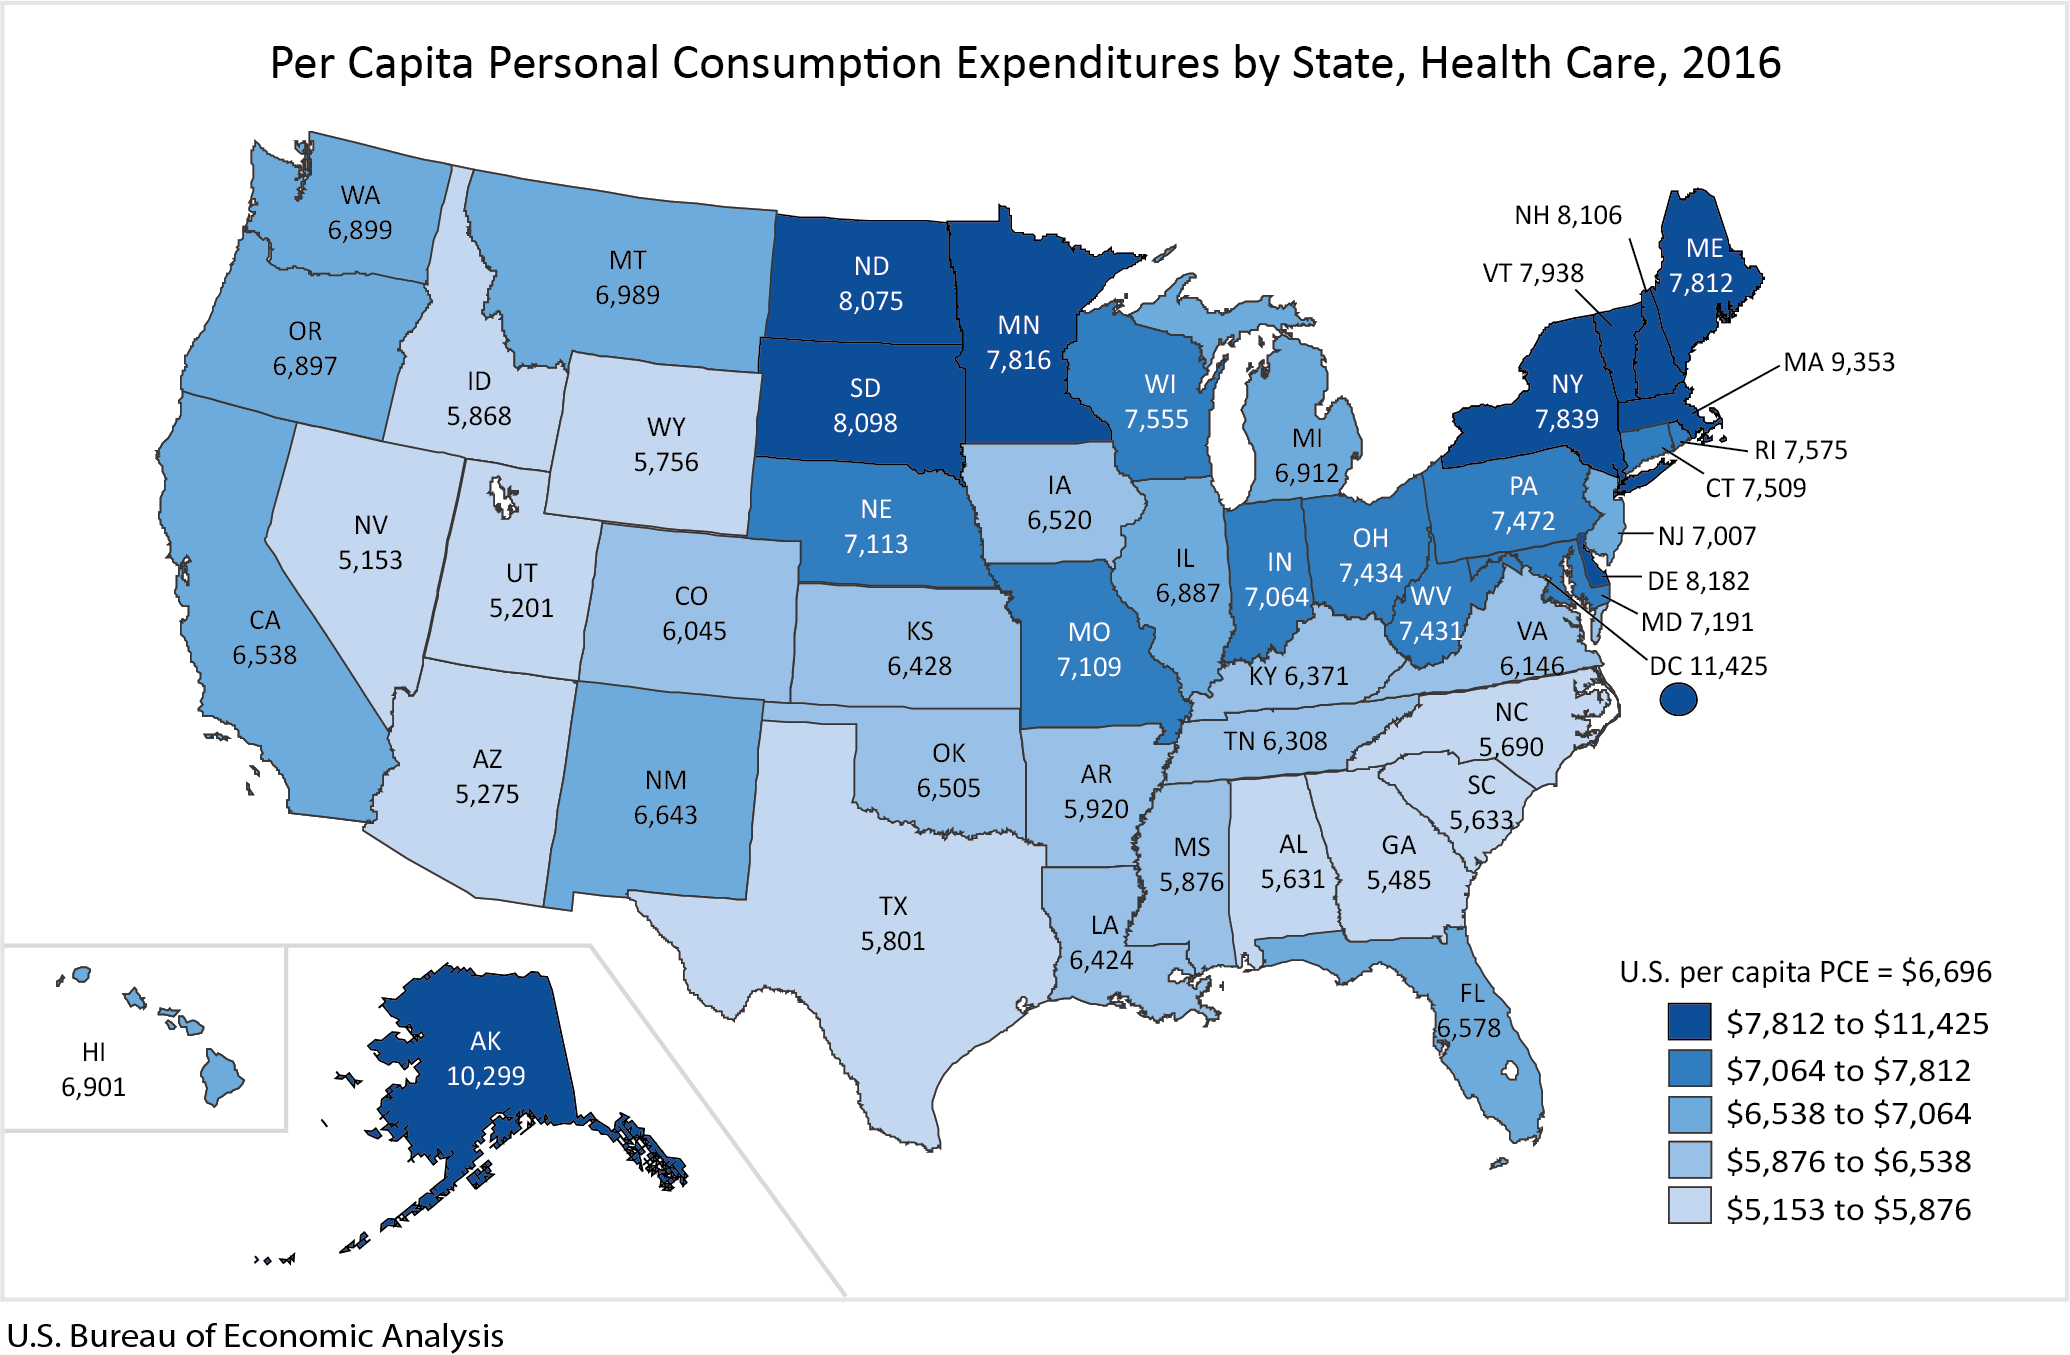 Per Capita Personal Consumption Expenditures by State, Health Care, 2016